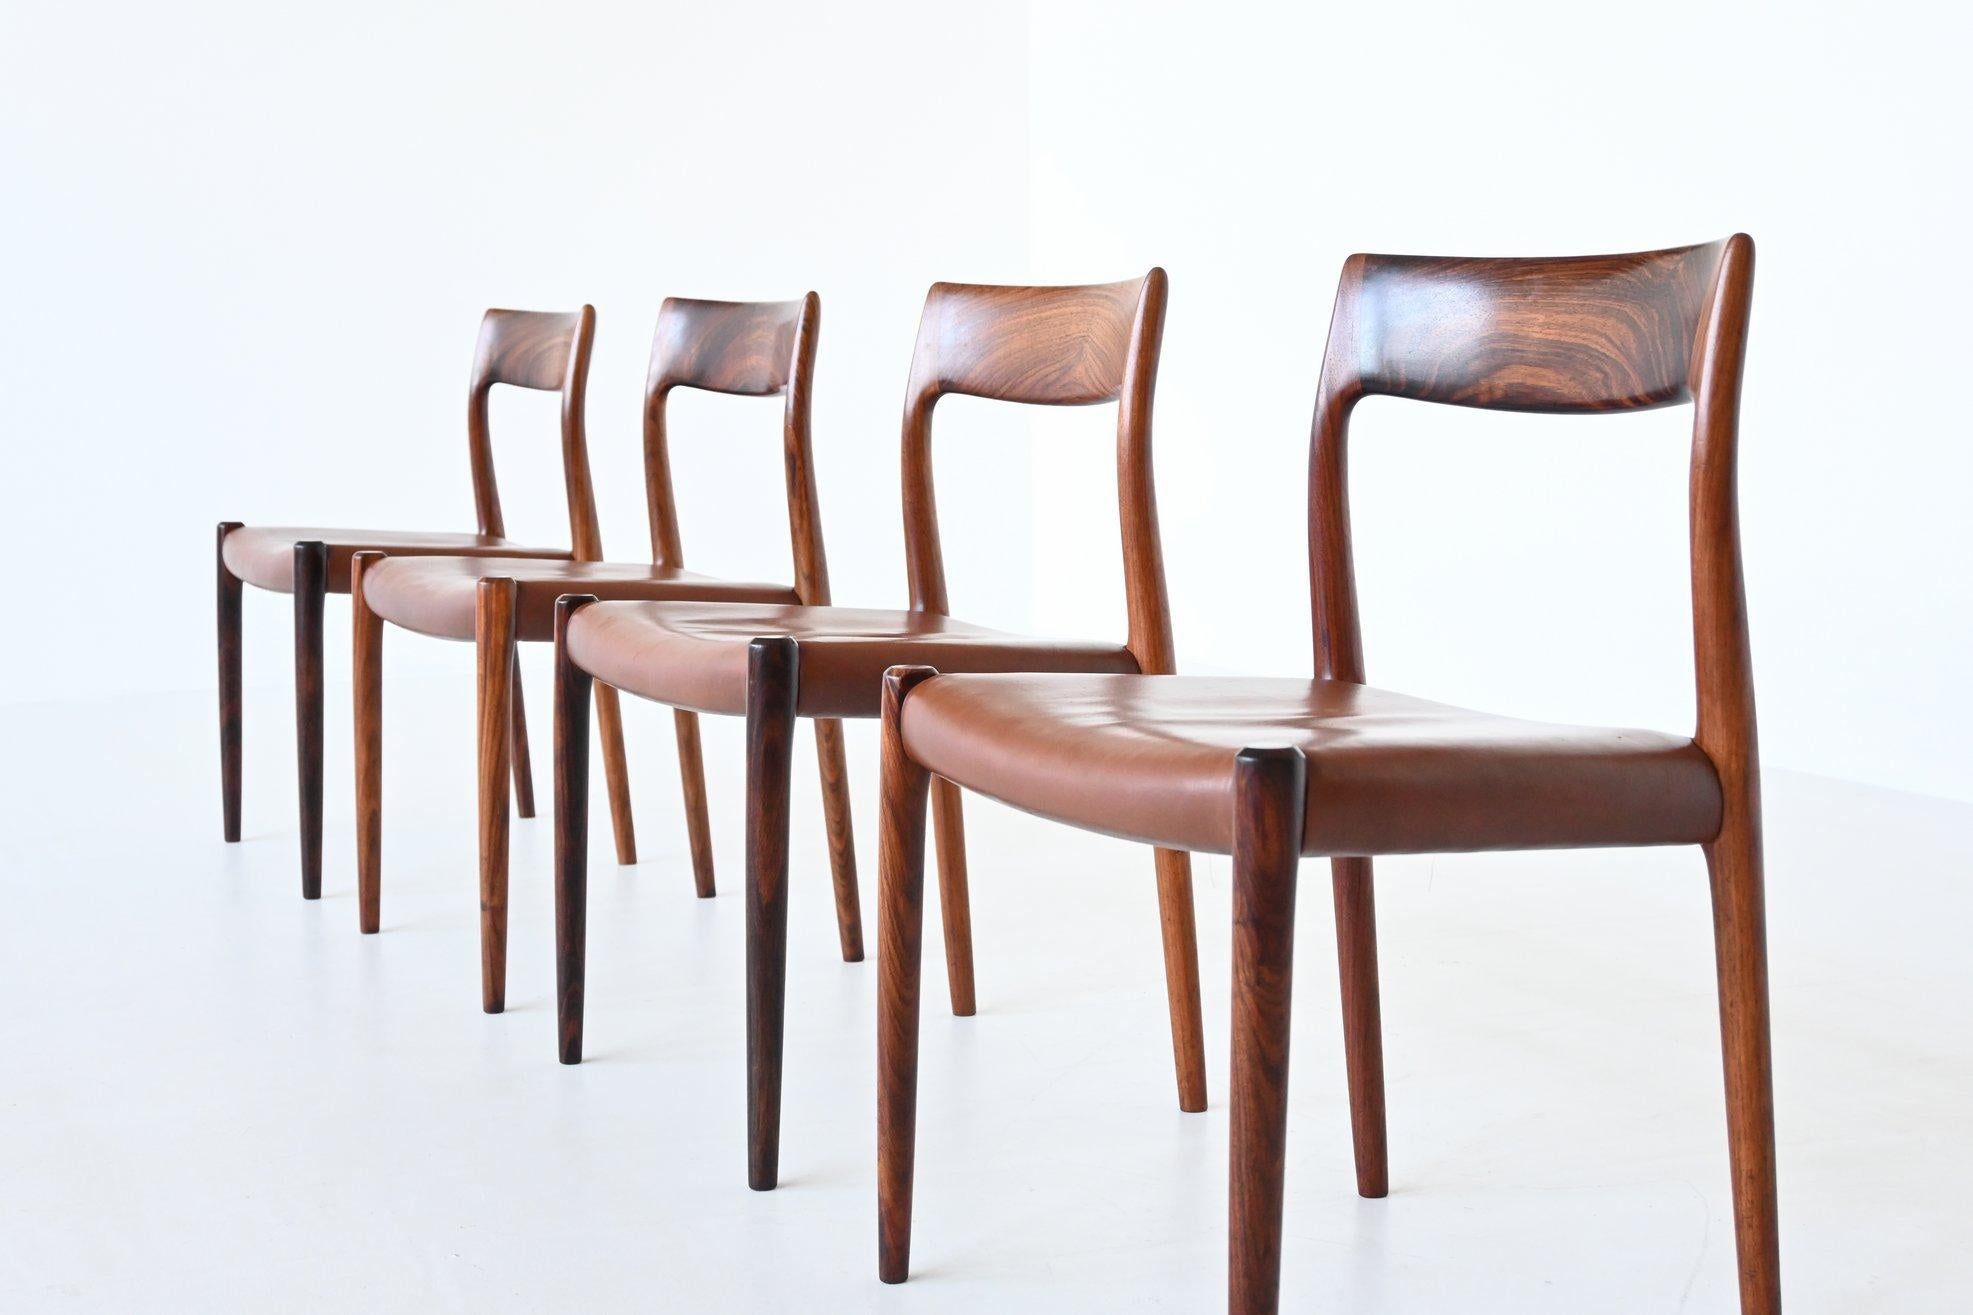 Very nice set of four dining chairs model 77 designed by Niels Otto Møller and manufactured by J.L. Møller Mobelfabrik, Denmark 1960. They are made of beautiful expressive grained solid rosewood and the seats are upholstered with original